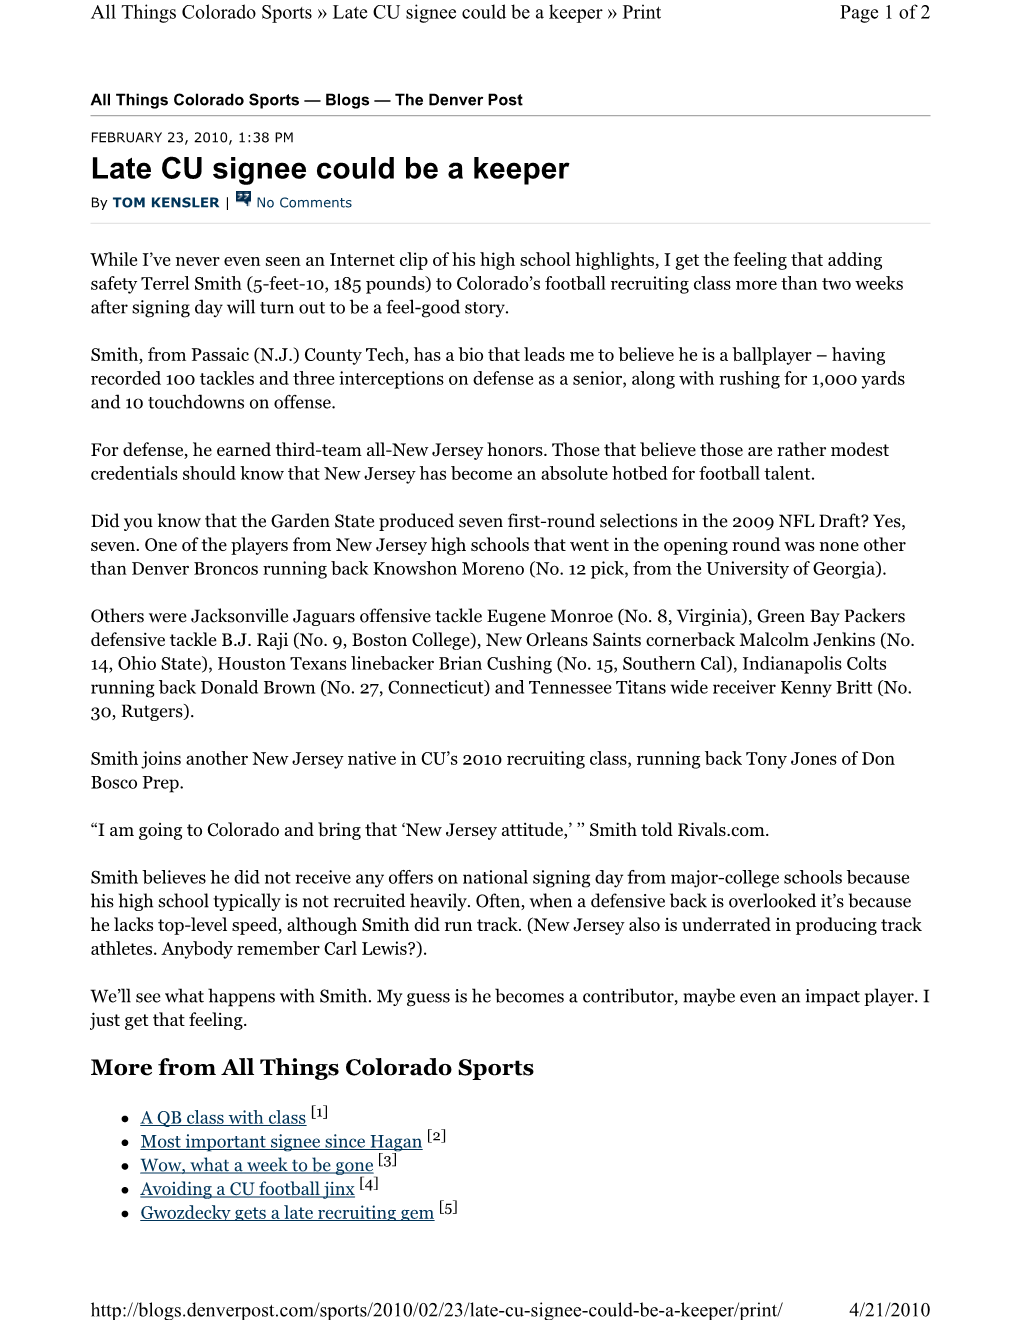 Late CU Signee Could Be a Keeper » Print Page 1 of 2